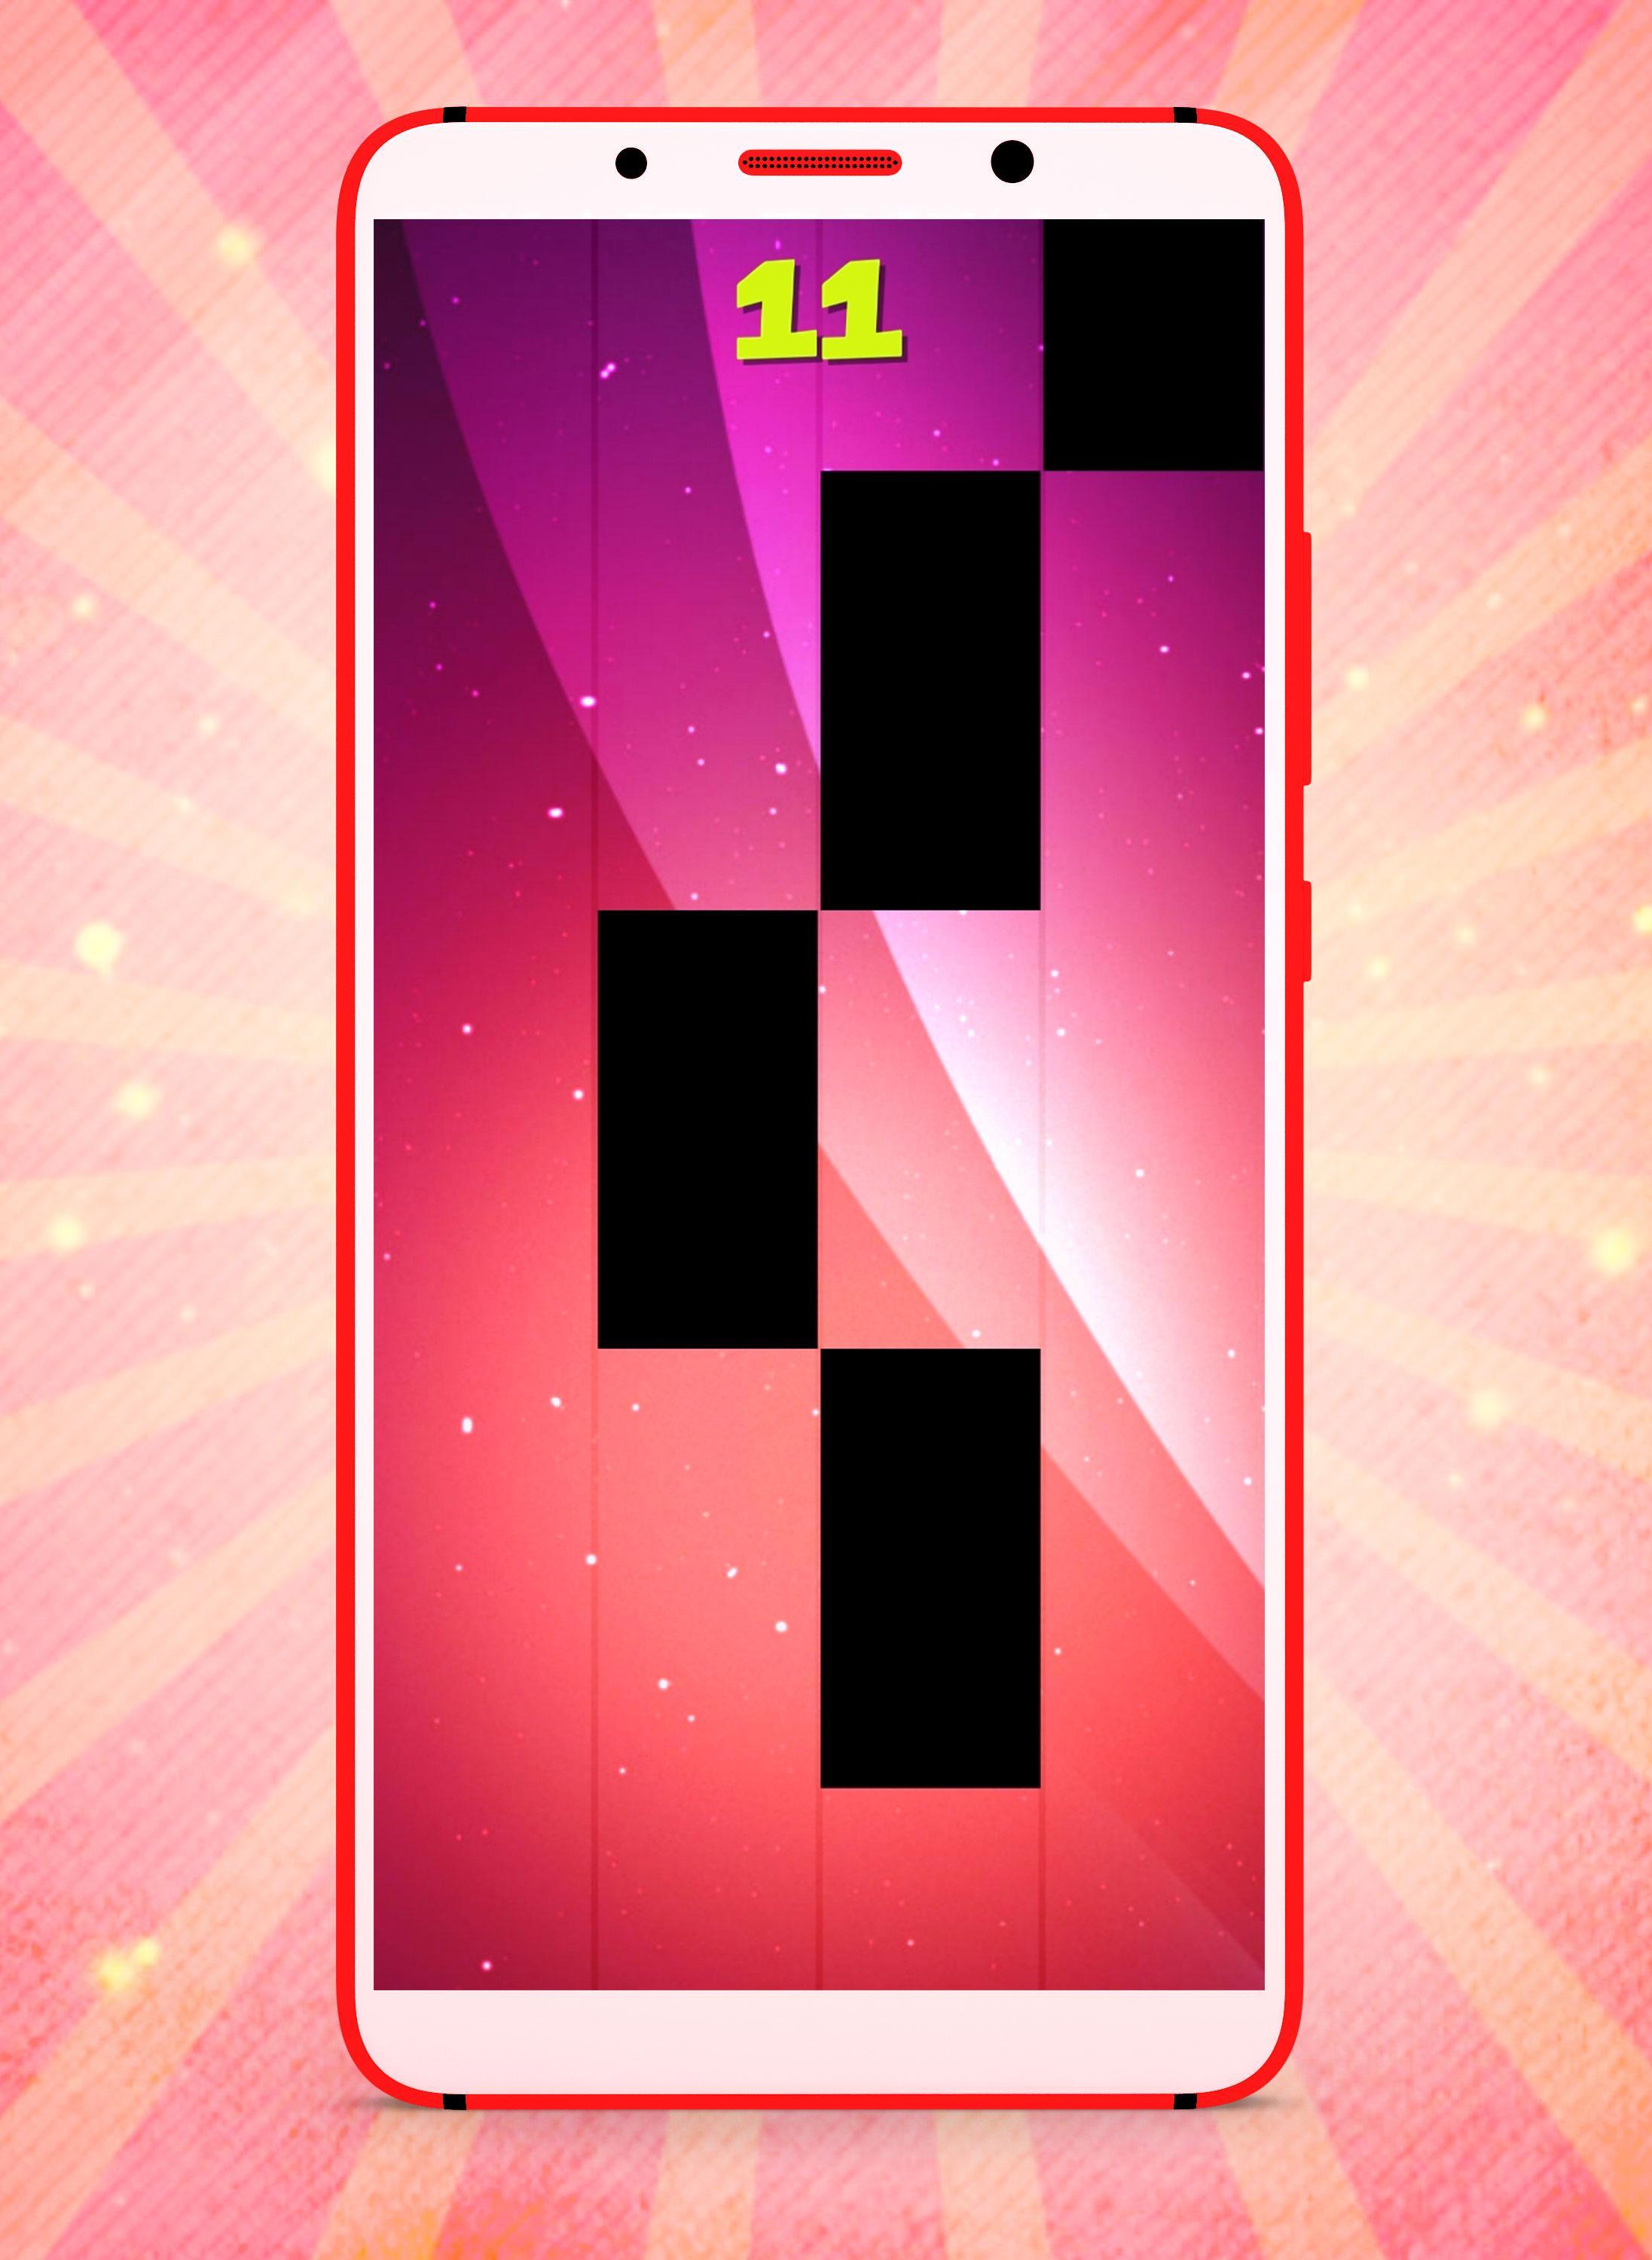 Nle Choppa Shotta Flow Fancy Piano Tiles For Android Apk Download